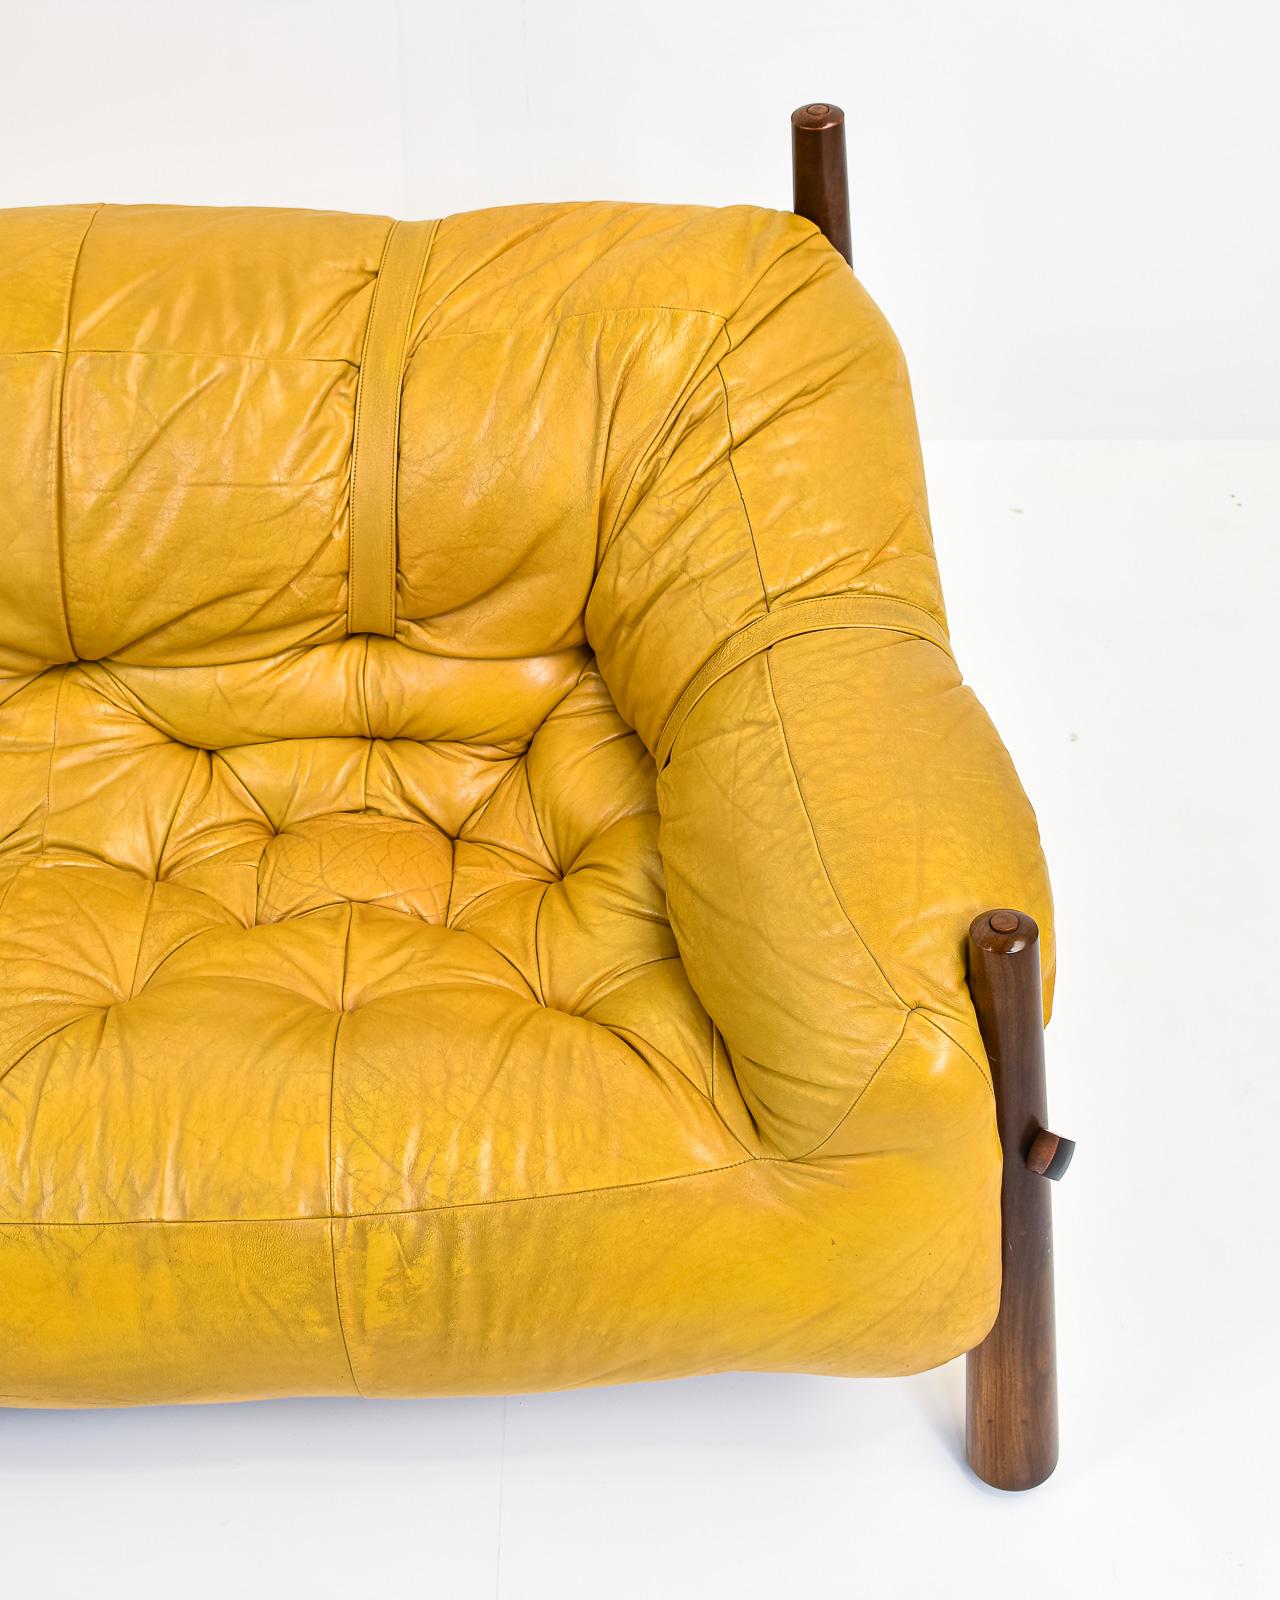 Mustard Yellow Leather Three-Seater Sofa by Percival Lafer, model 'MP-81' 3